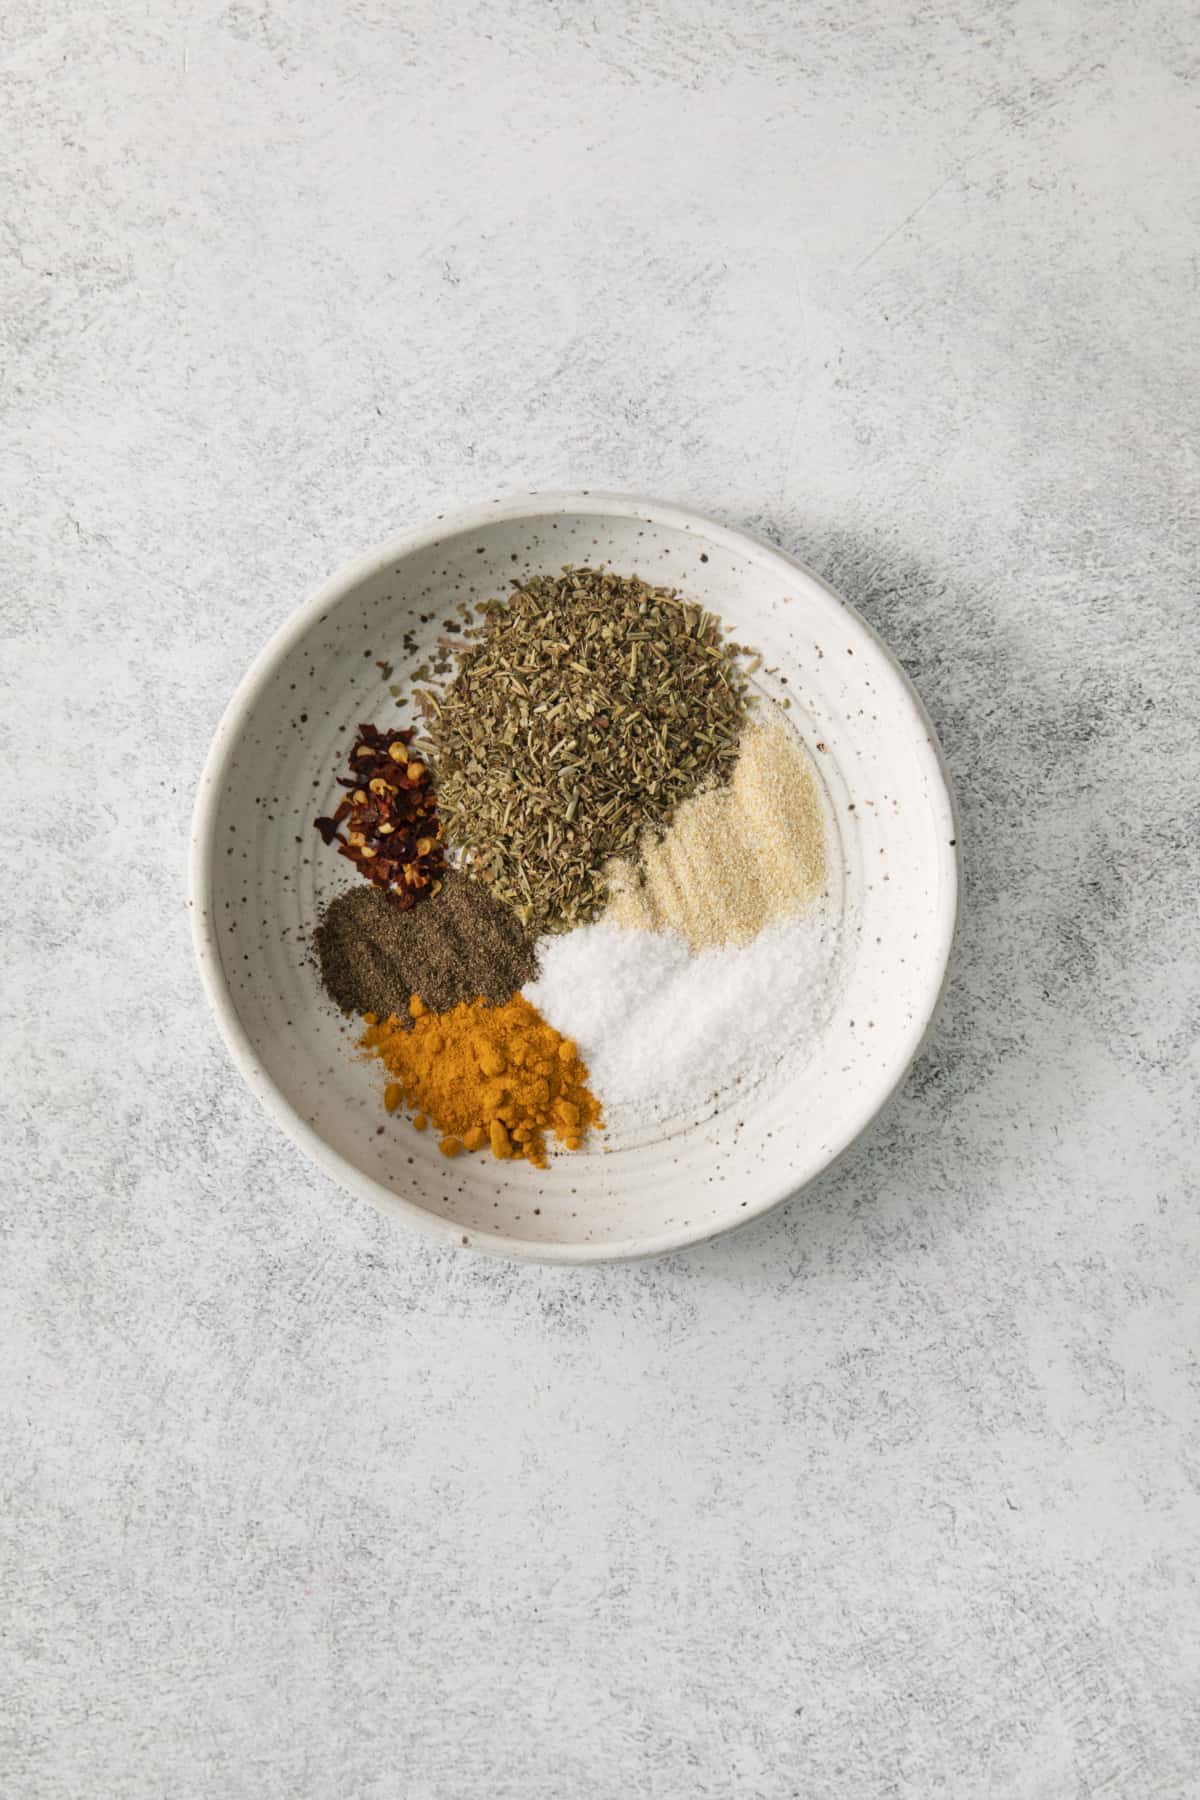 All spices for the dry rub are separated in the bowl.